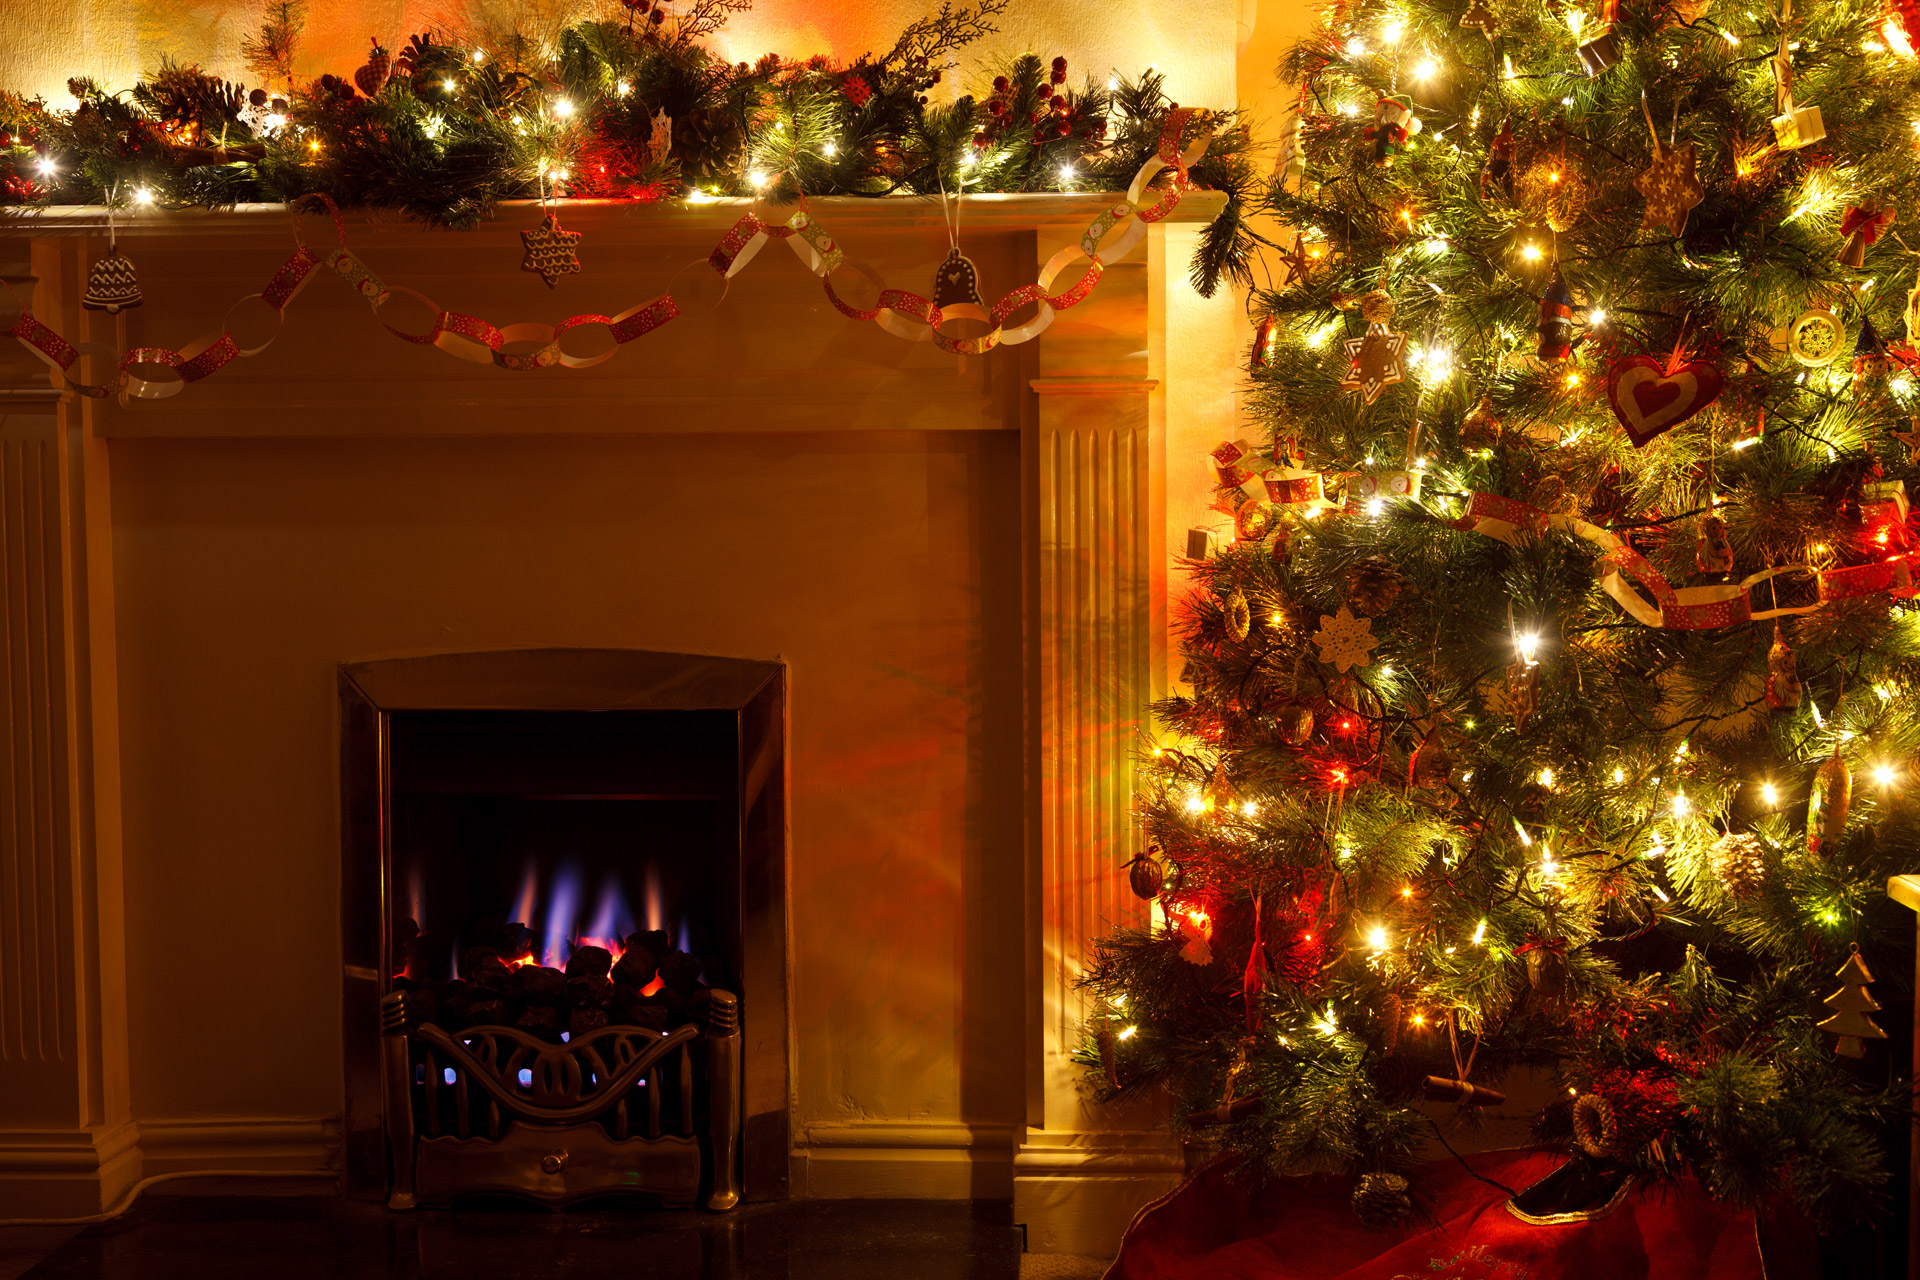 Indoor fireplace decorated with garlands and Christmas lights, with a tree on the side